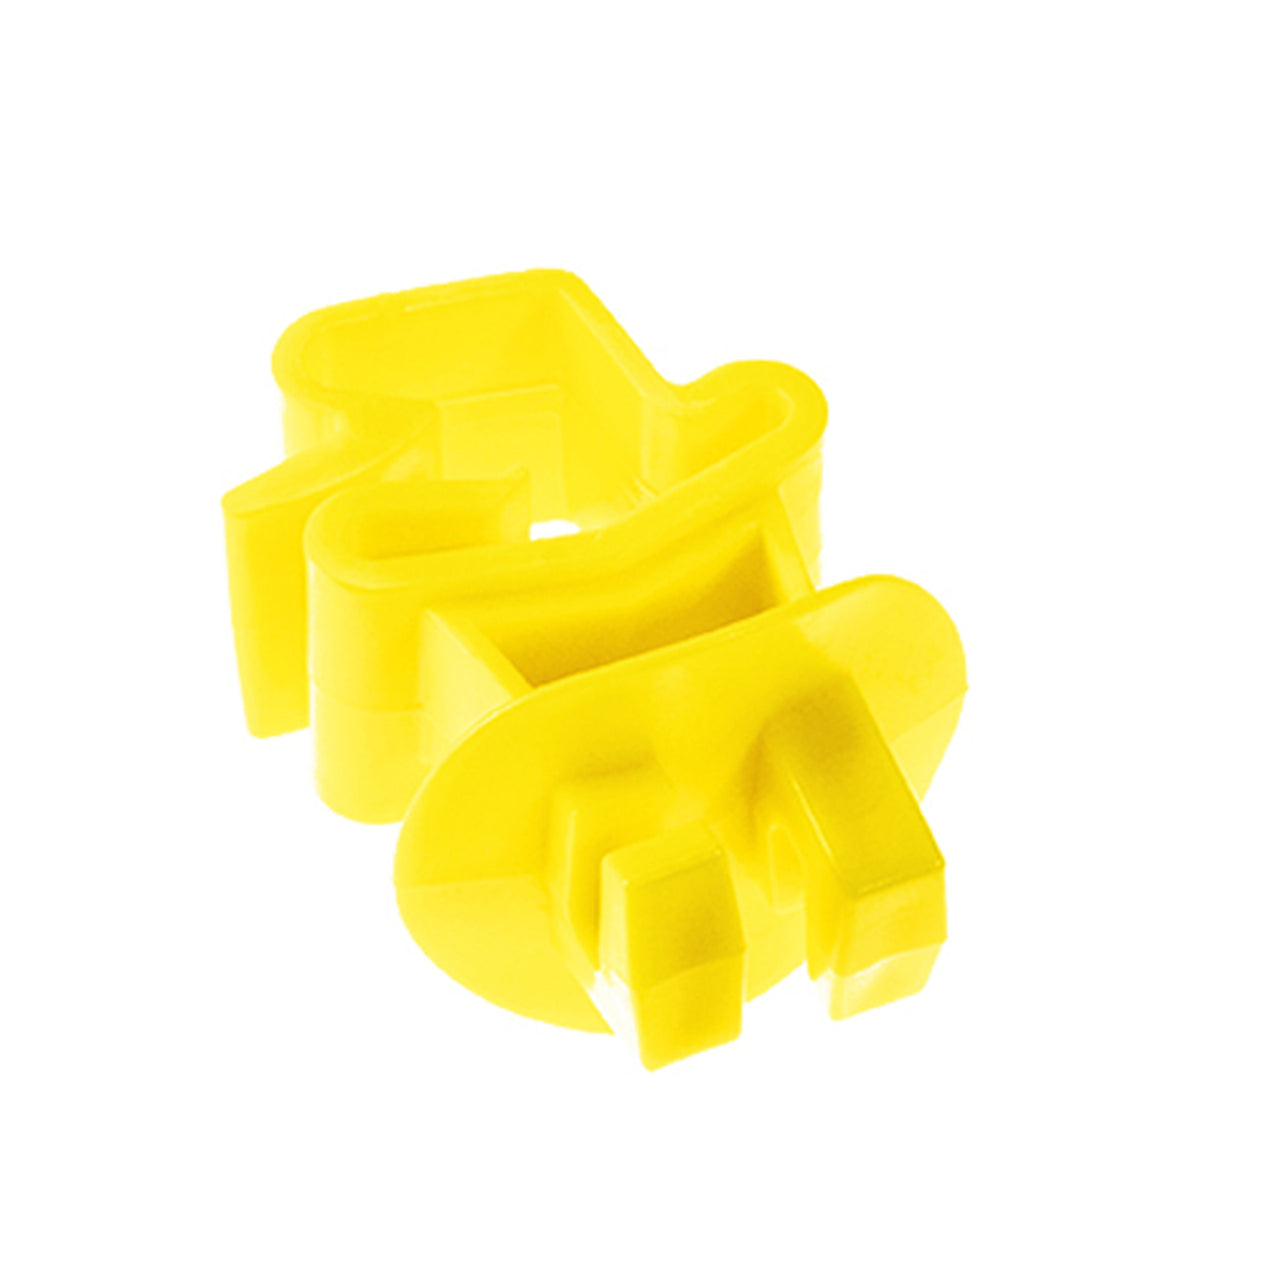 Patriot T-post claw insulator - yellow (25 pack)